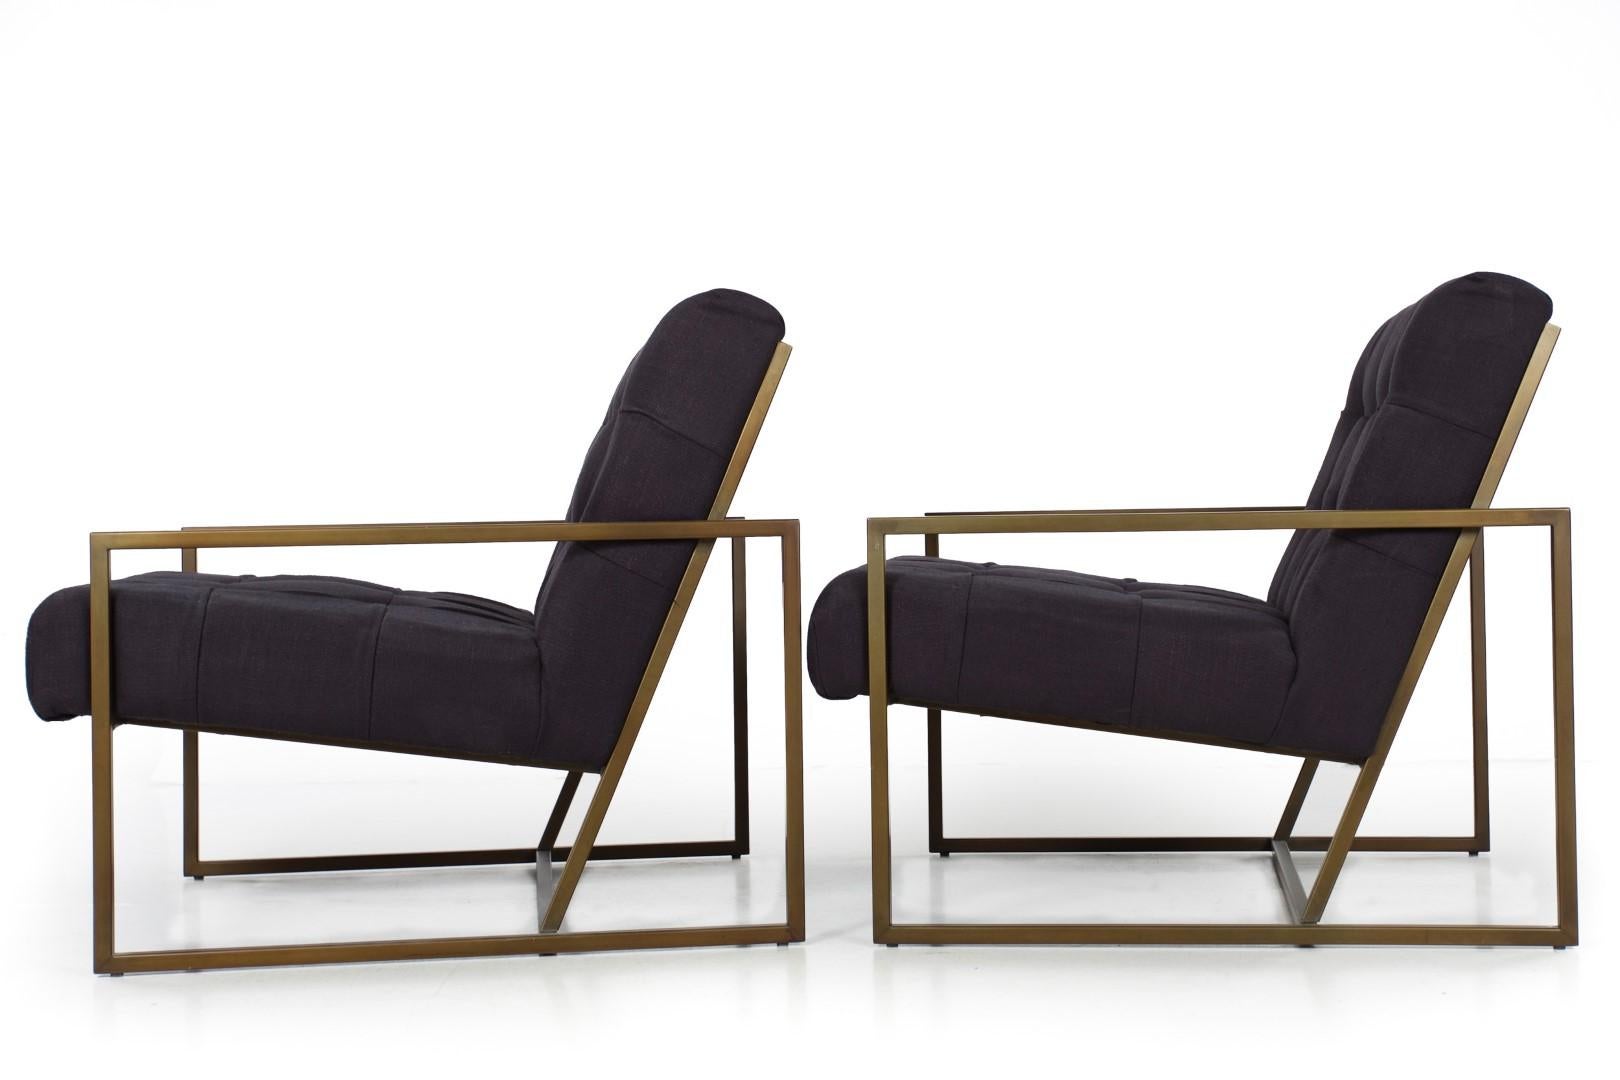 Contemporary Regina Andrew Pair of Mid-Century Modern Style Tufted Steel Arm Chairs For Sale